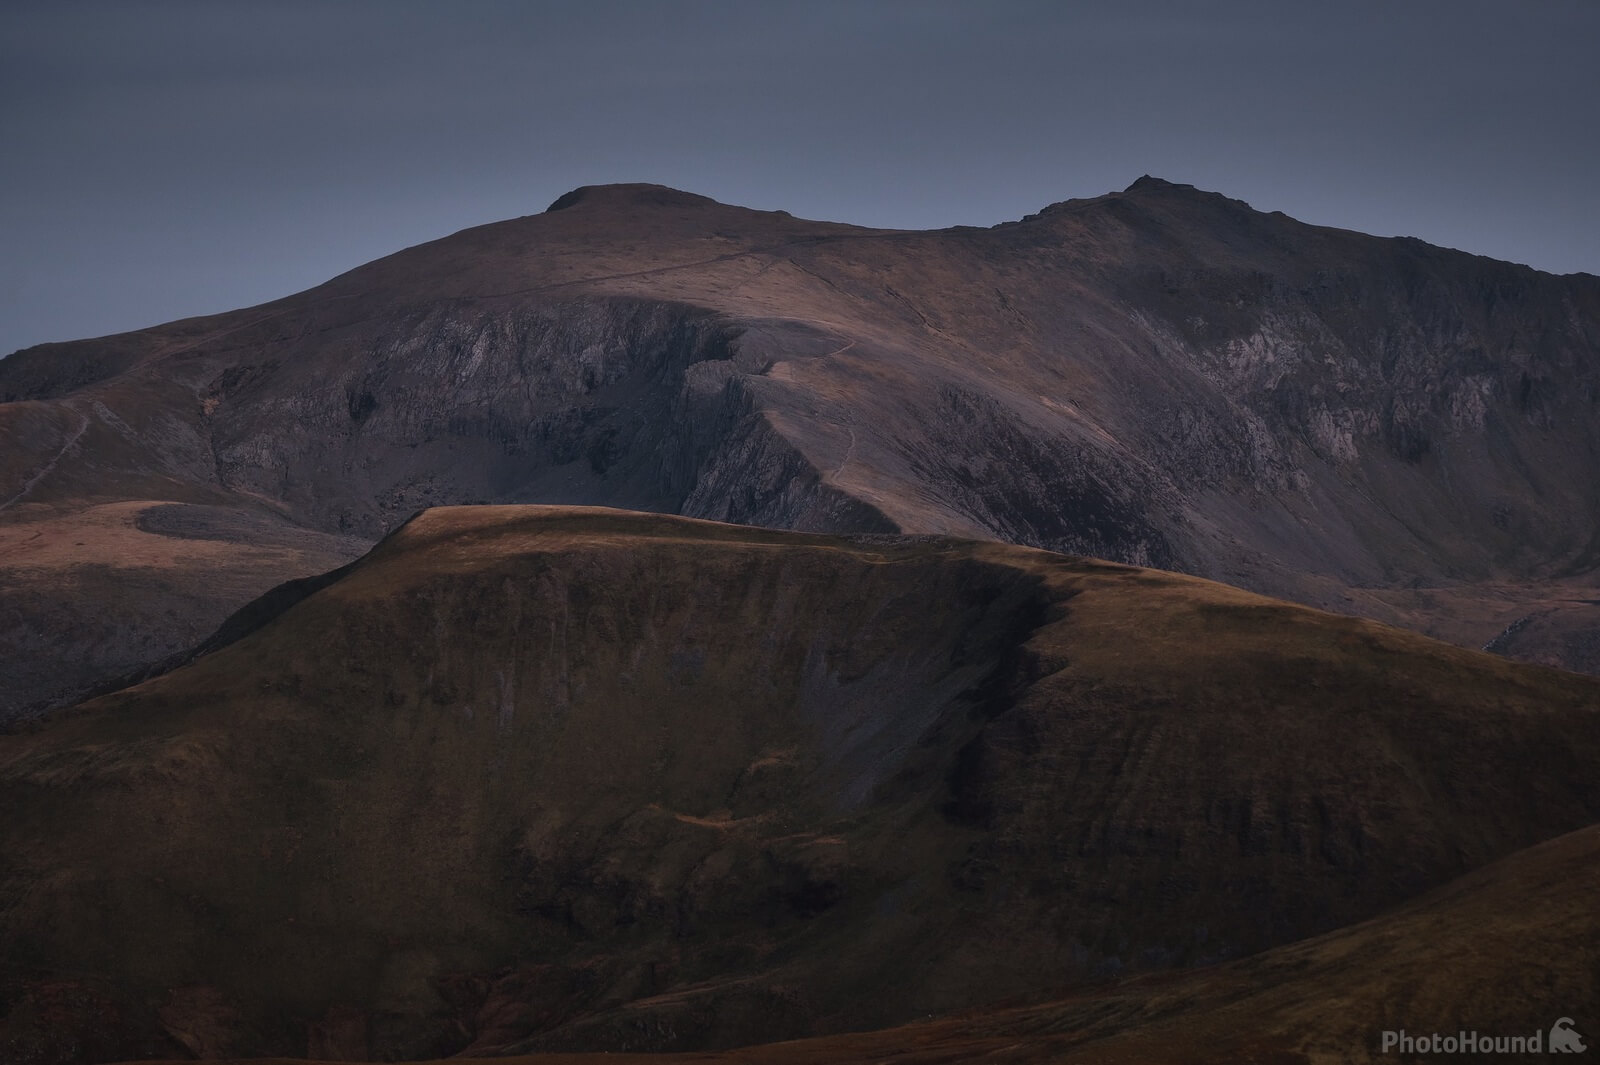 Image of Snowdon - Summit by Rhys Parry